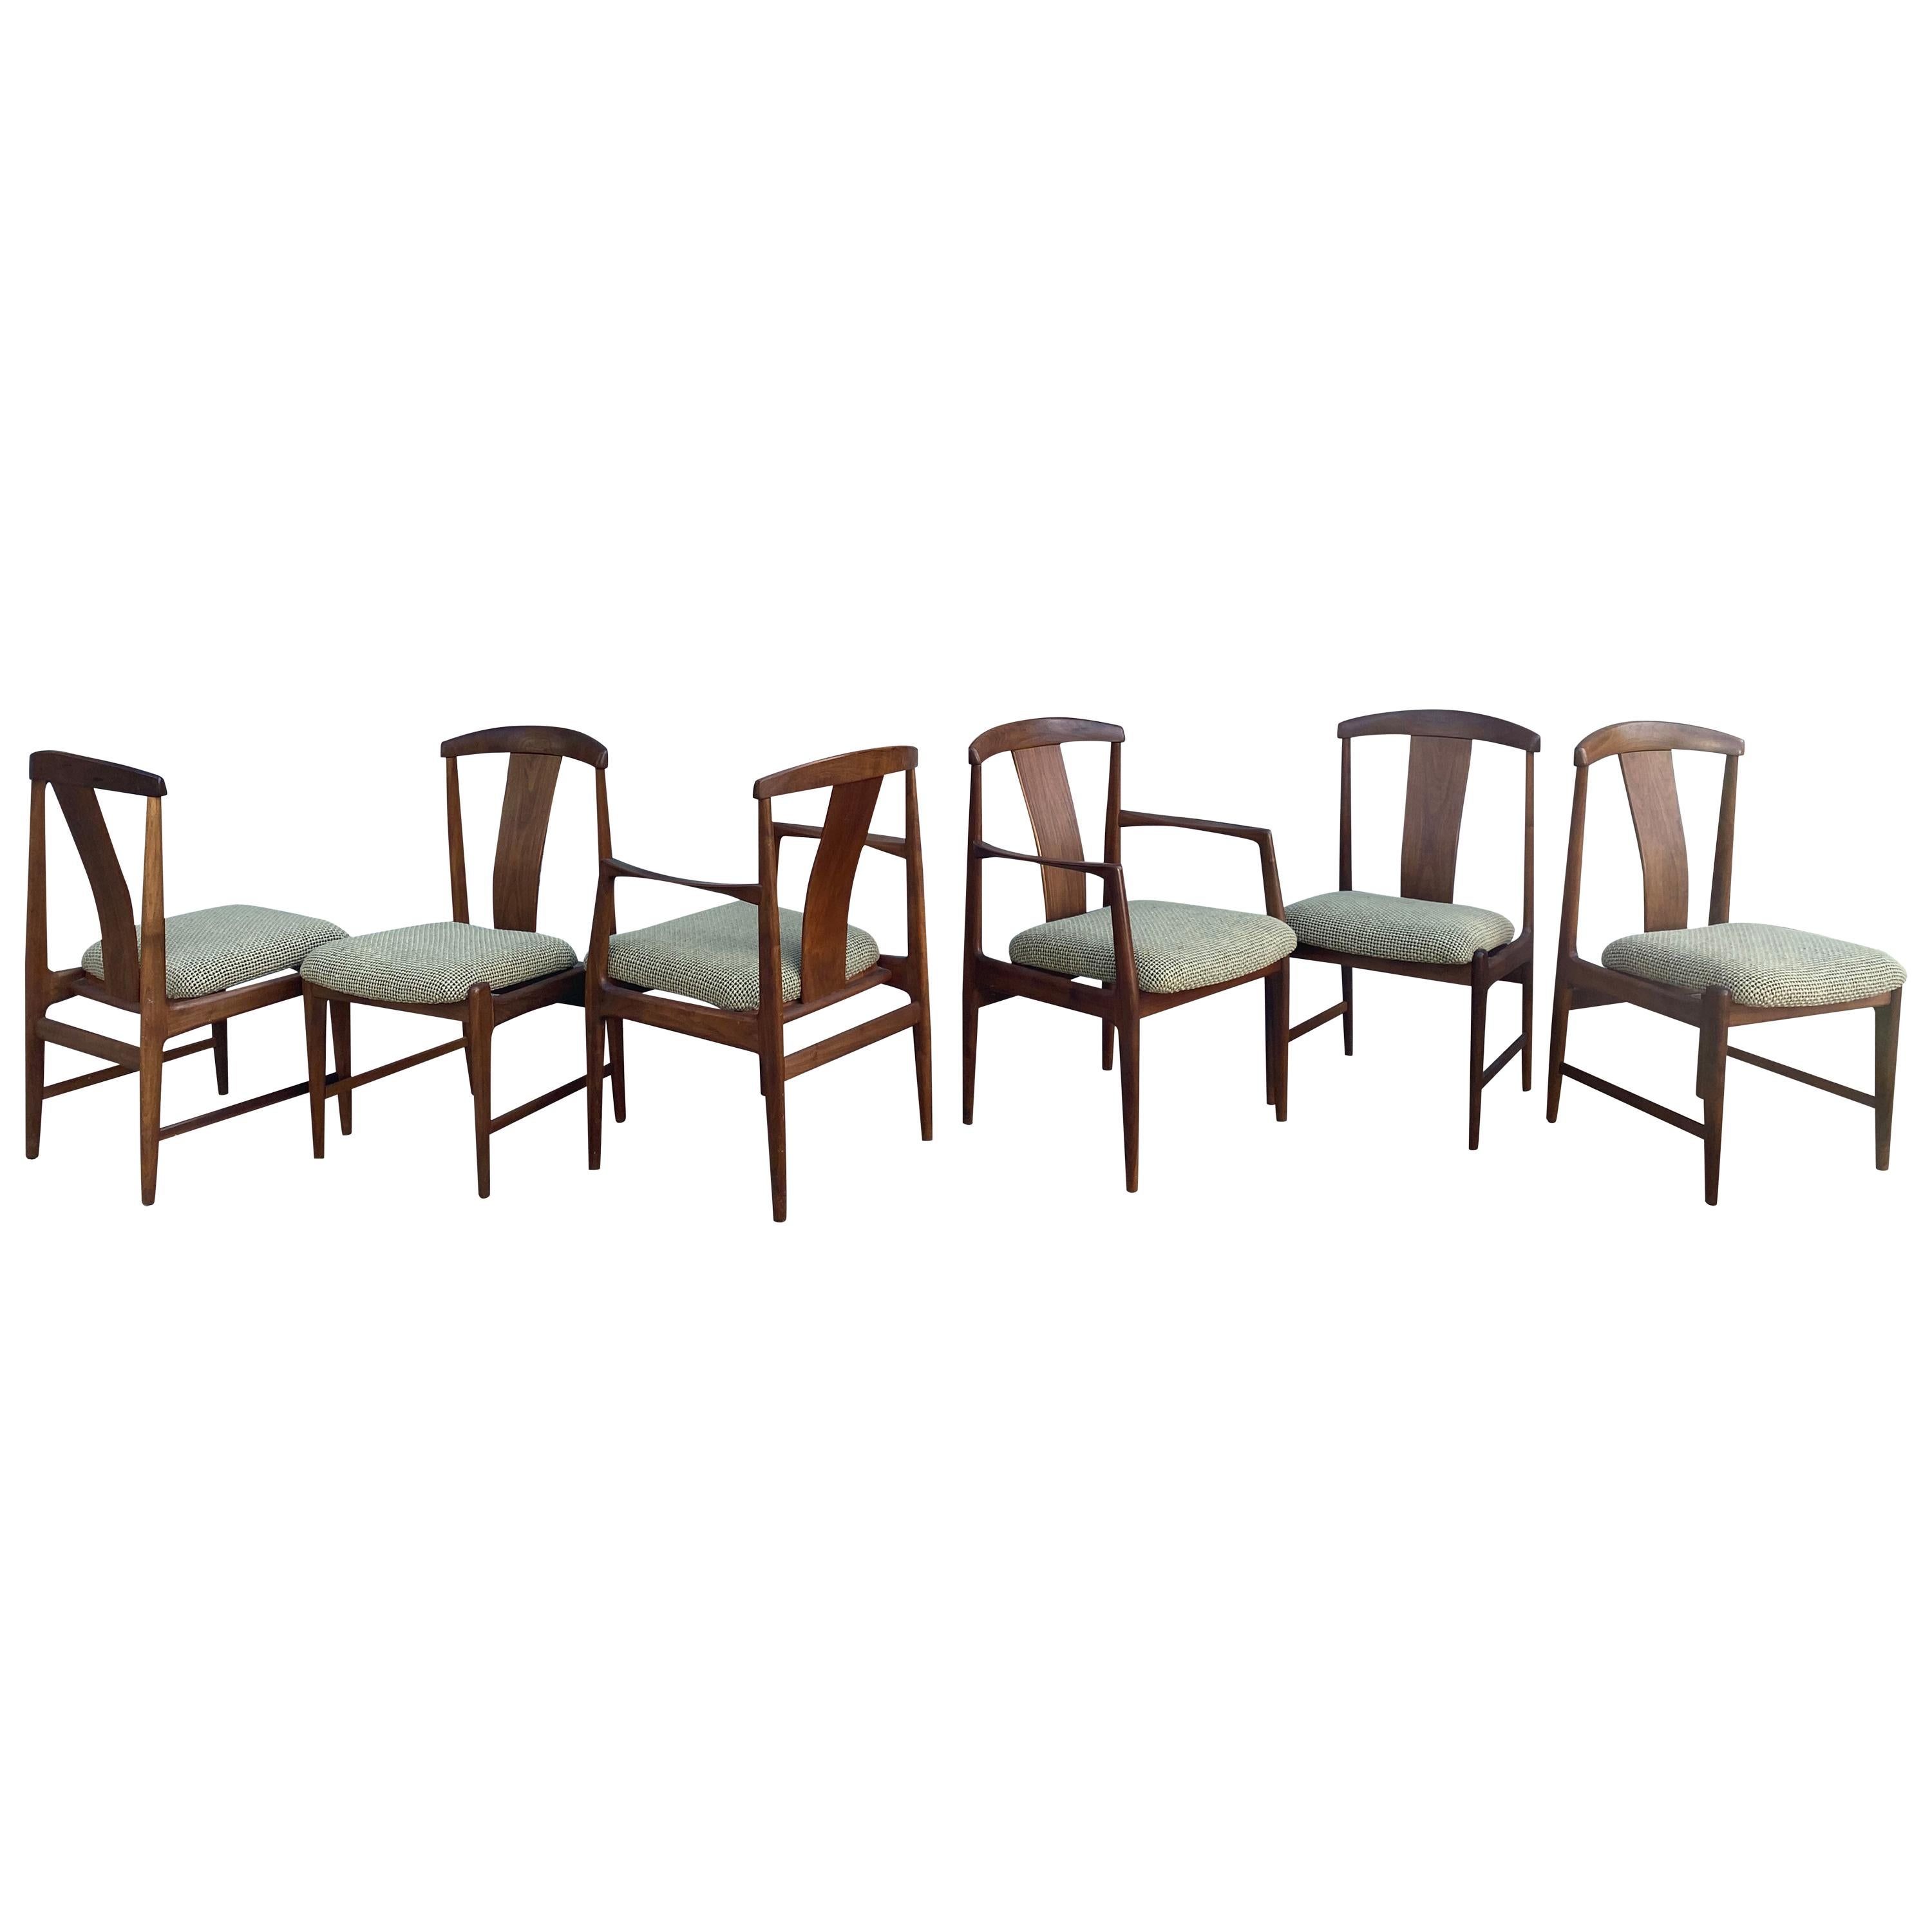 Midcentury Set of 6 Teak Dining Chairs by Folke Ohlsson for DUX